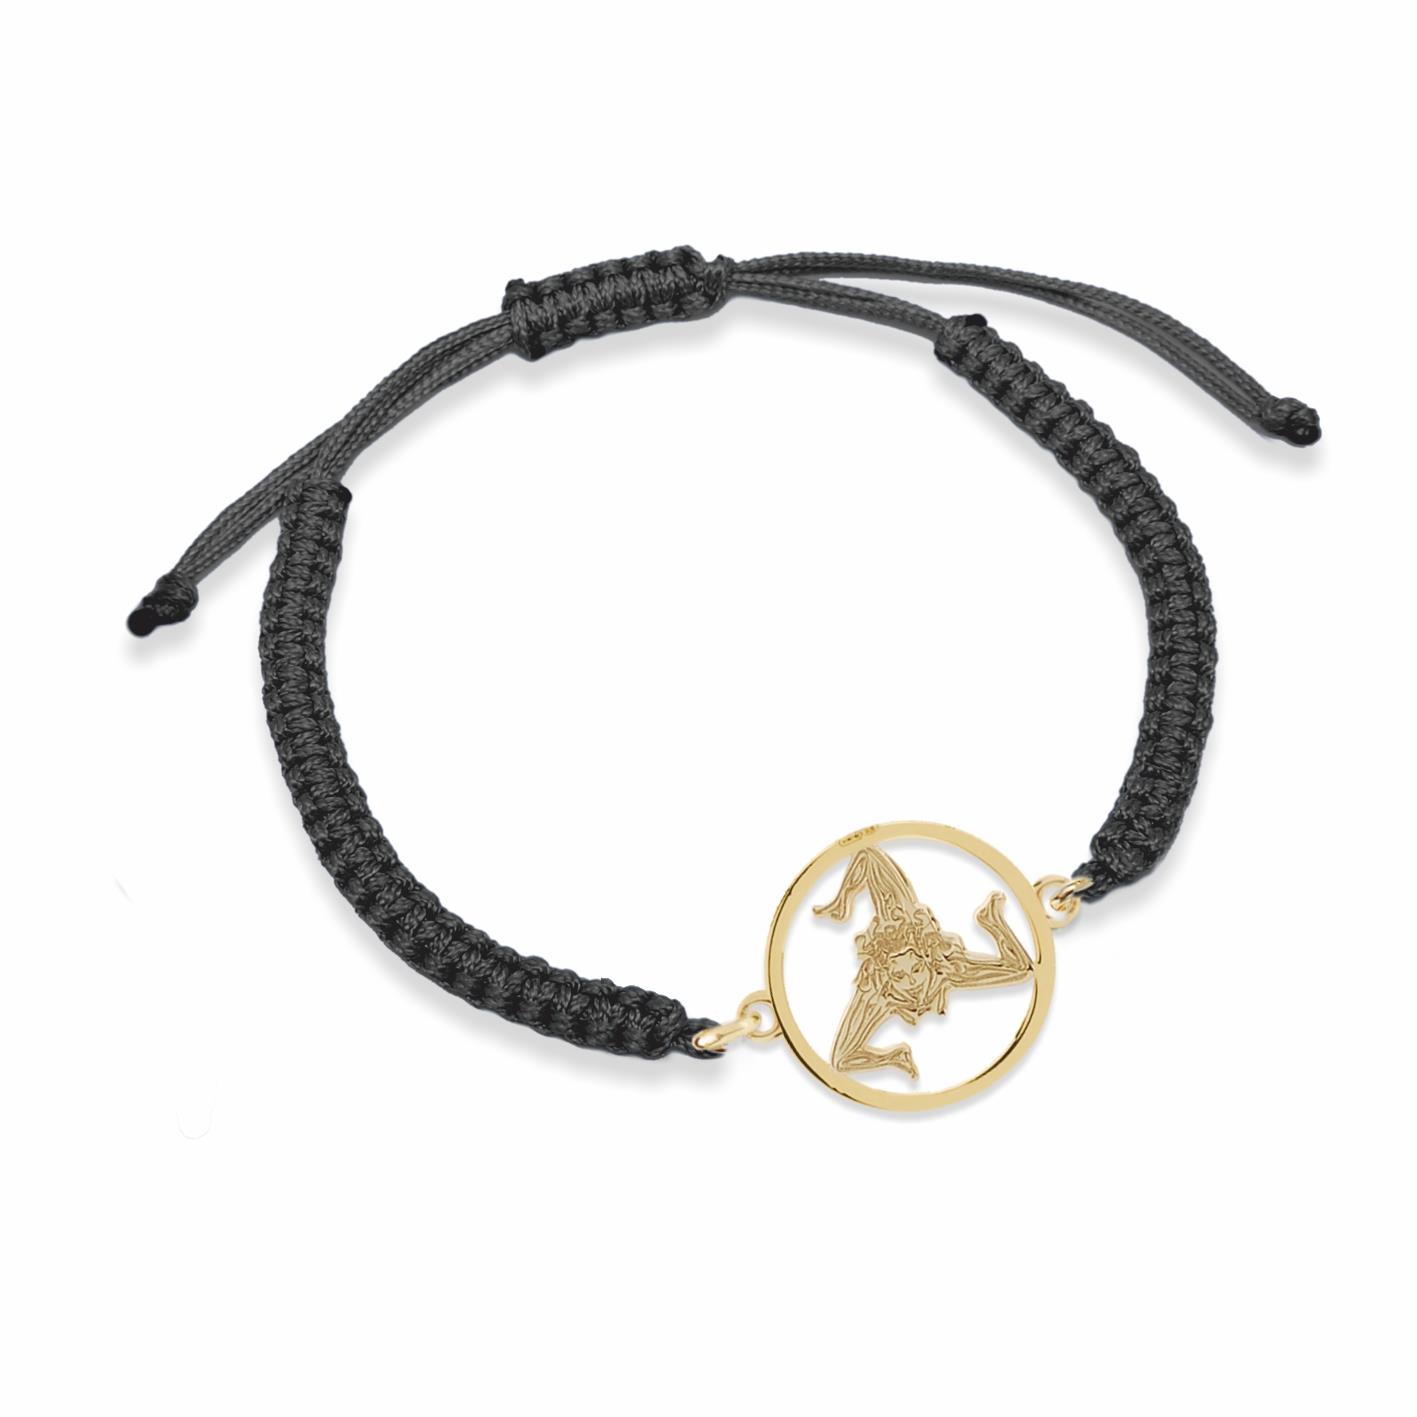 Black nylon bracelet with the Trinacria symbol enclosed in the golden silver circle - MY SICILY